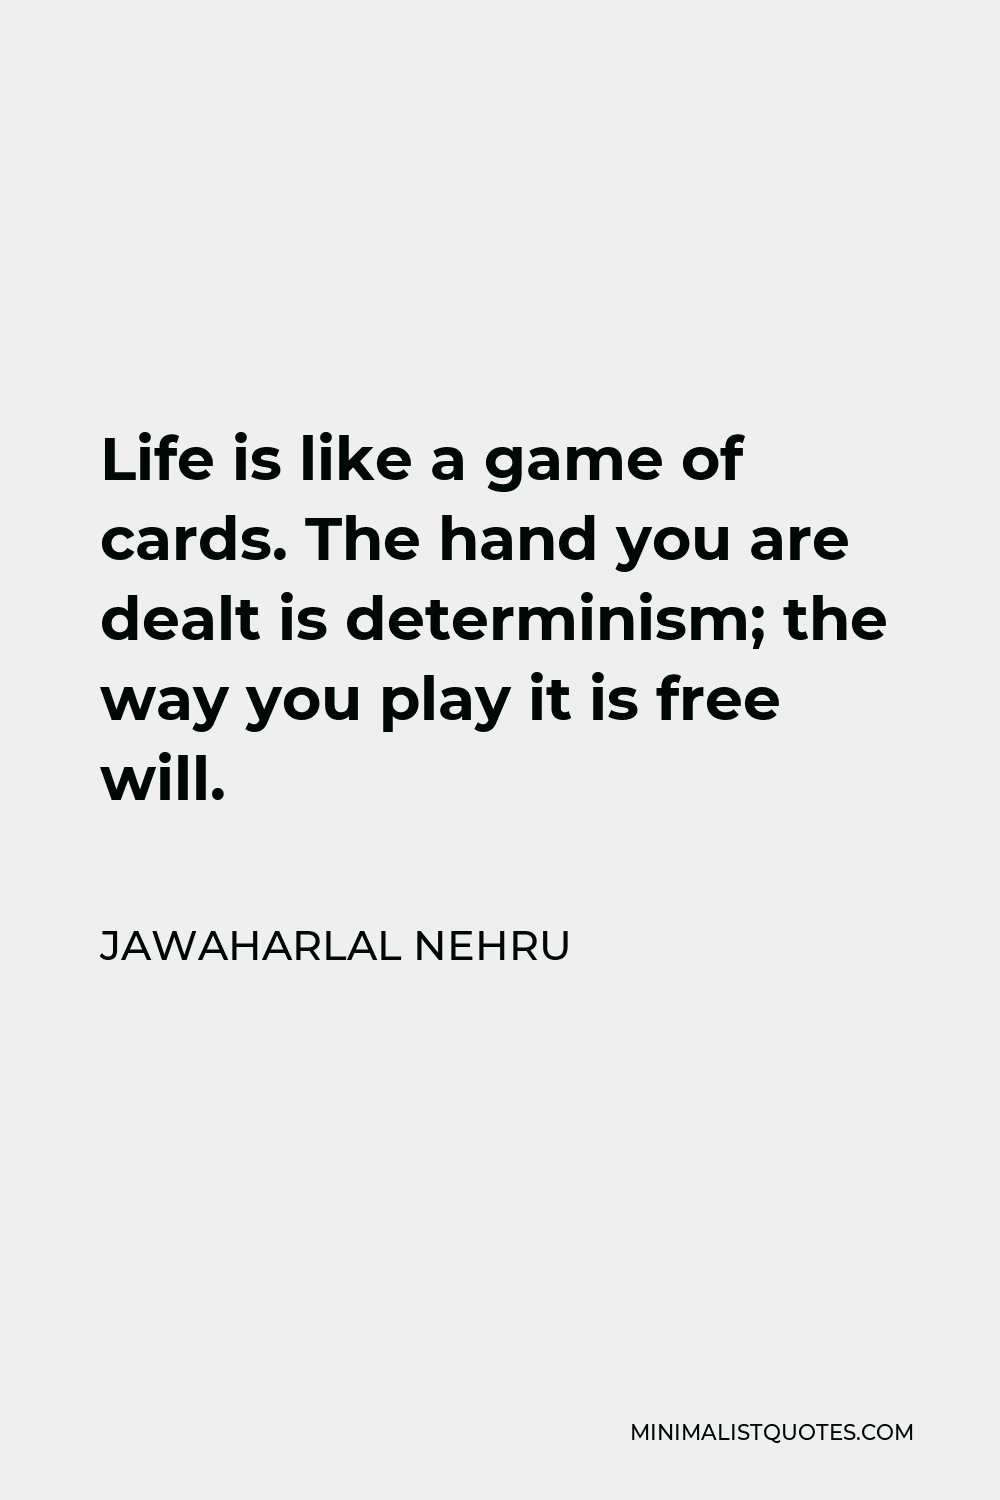 Jawaharlal Nehru Quote - Life is like a game of cards. The hand you are dealt is determinism; the way you play it is free will.